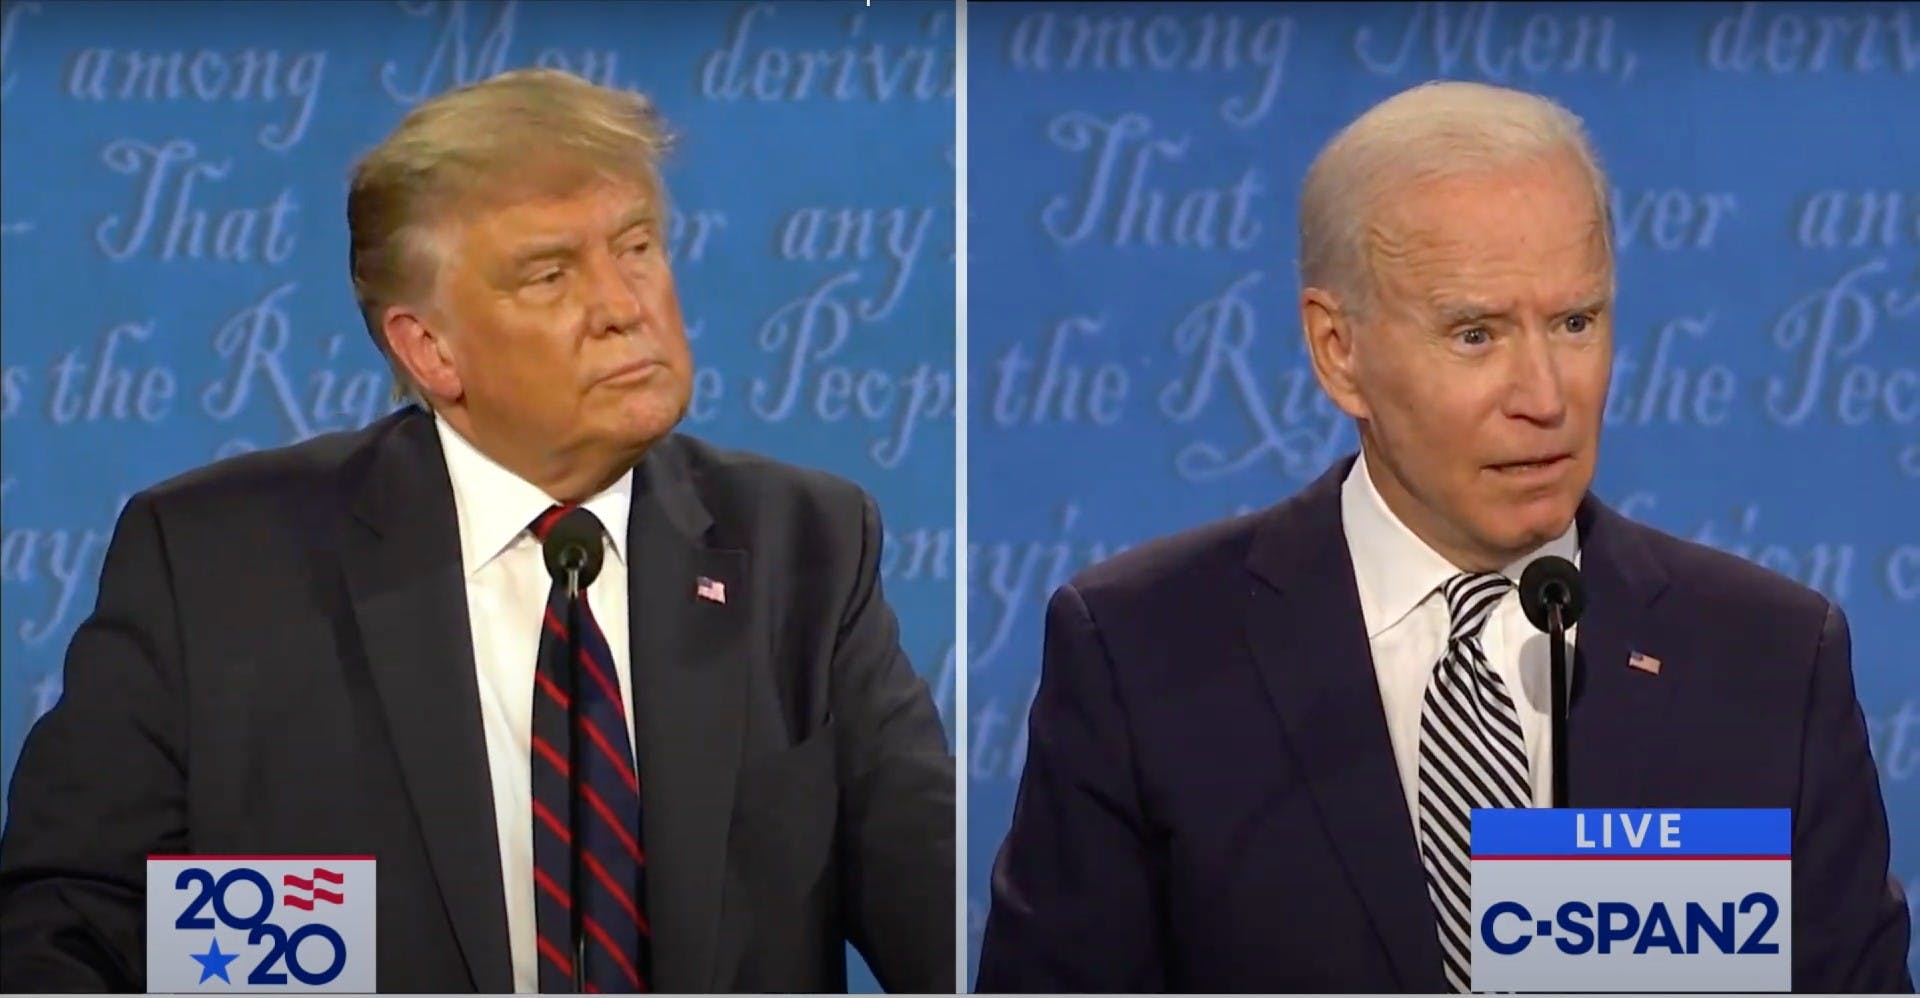 Pornhub viewership dropped significantly during the Trump-Biden debate